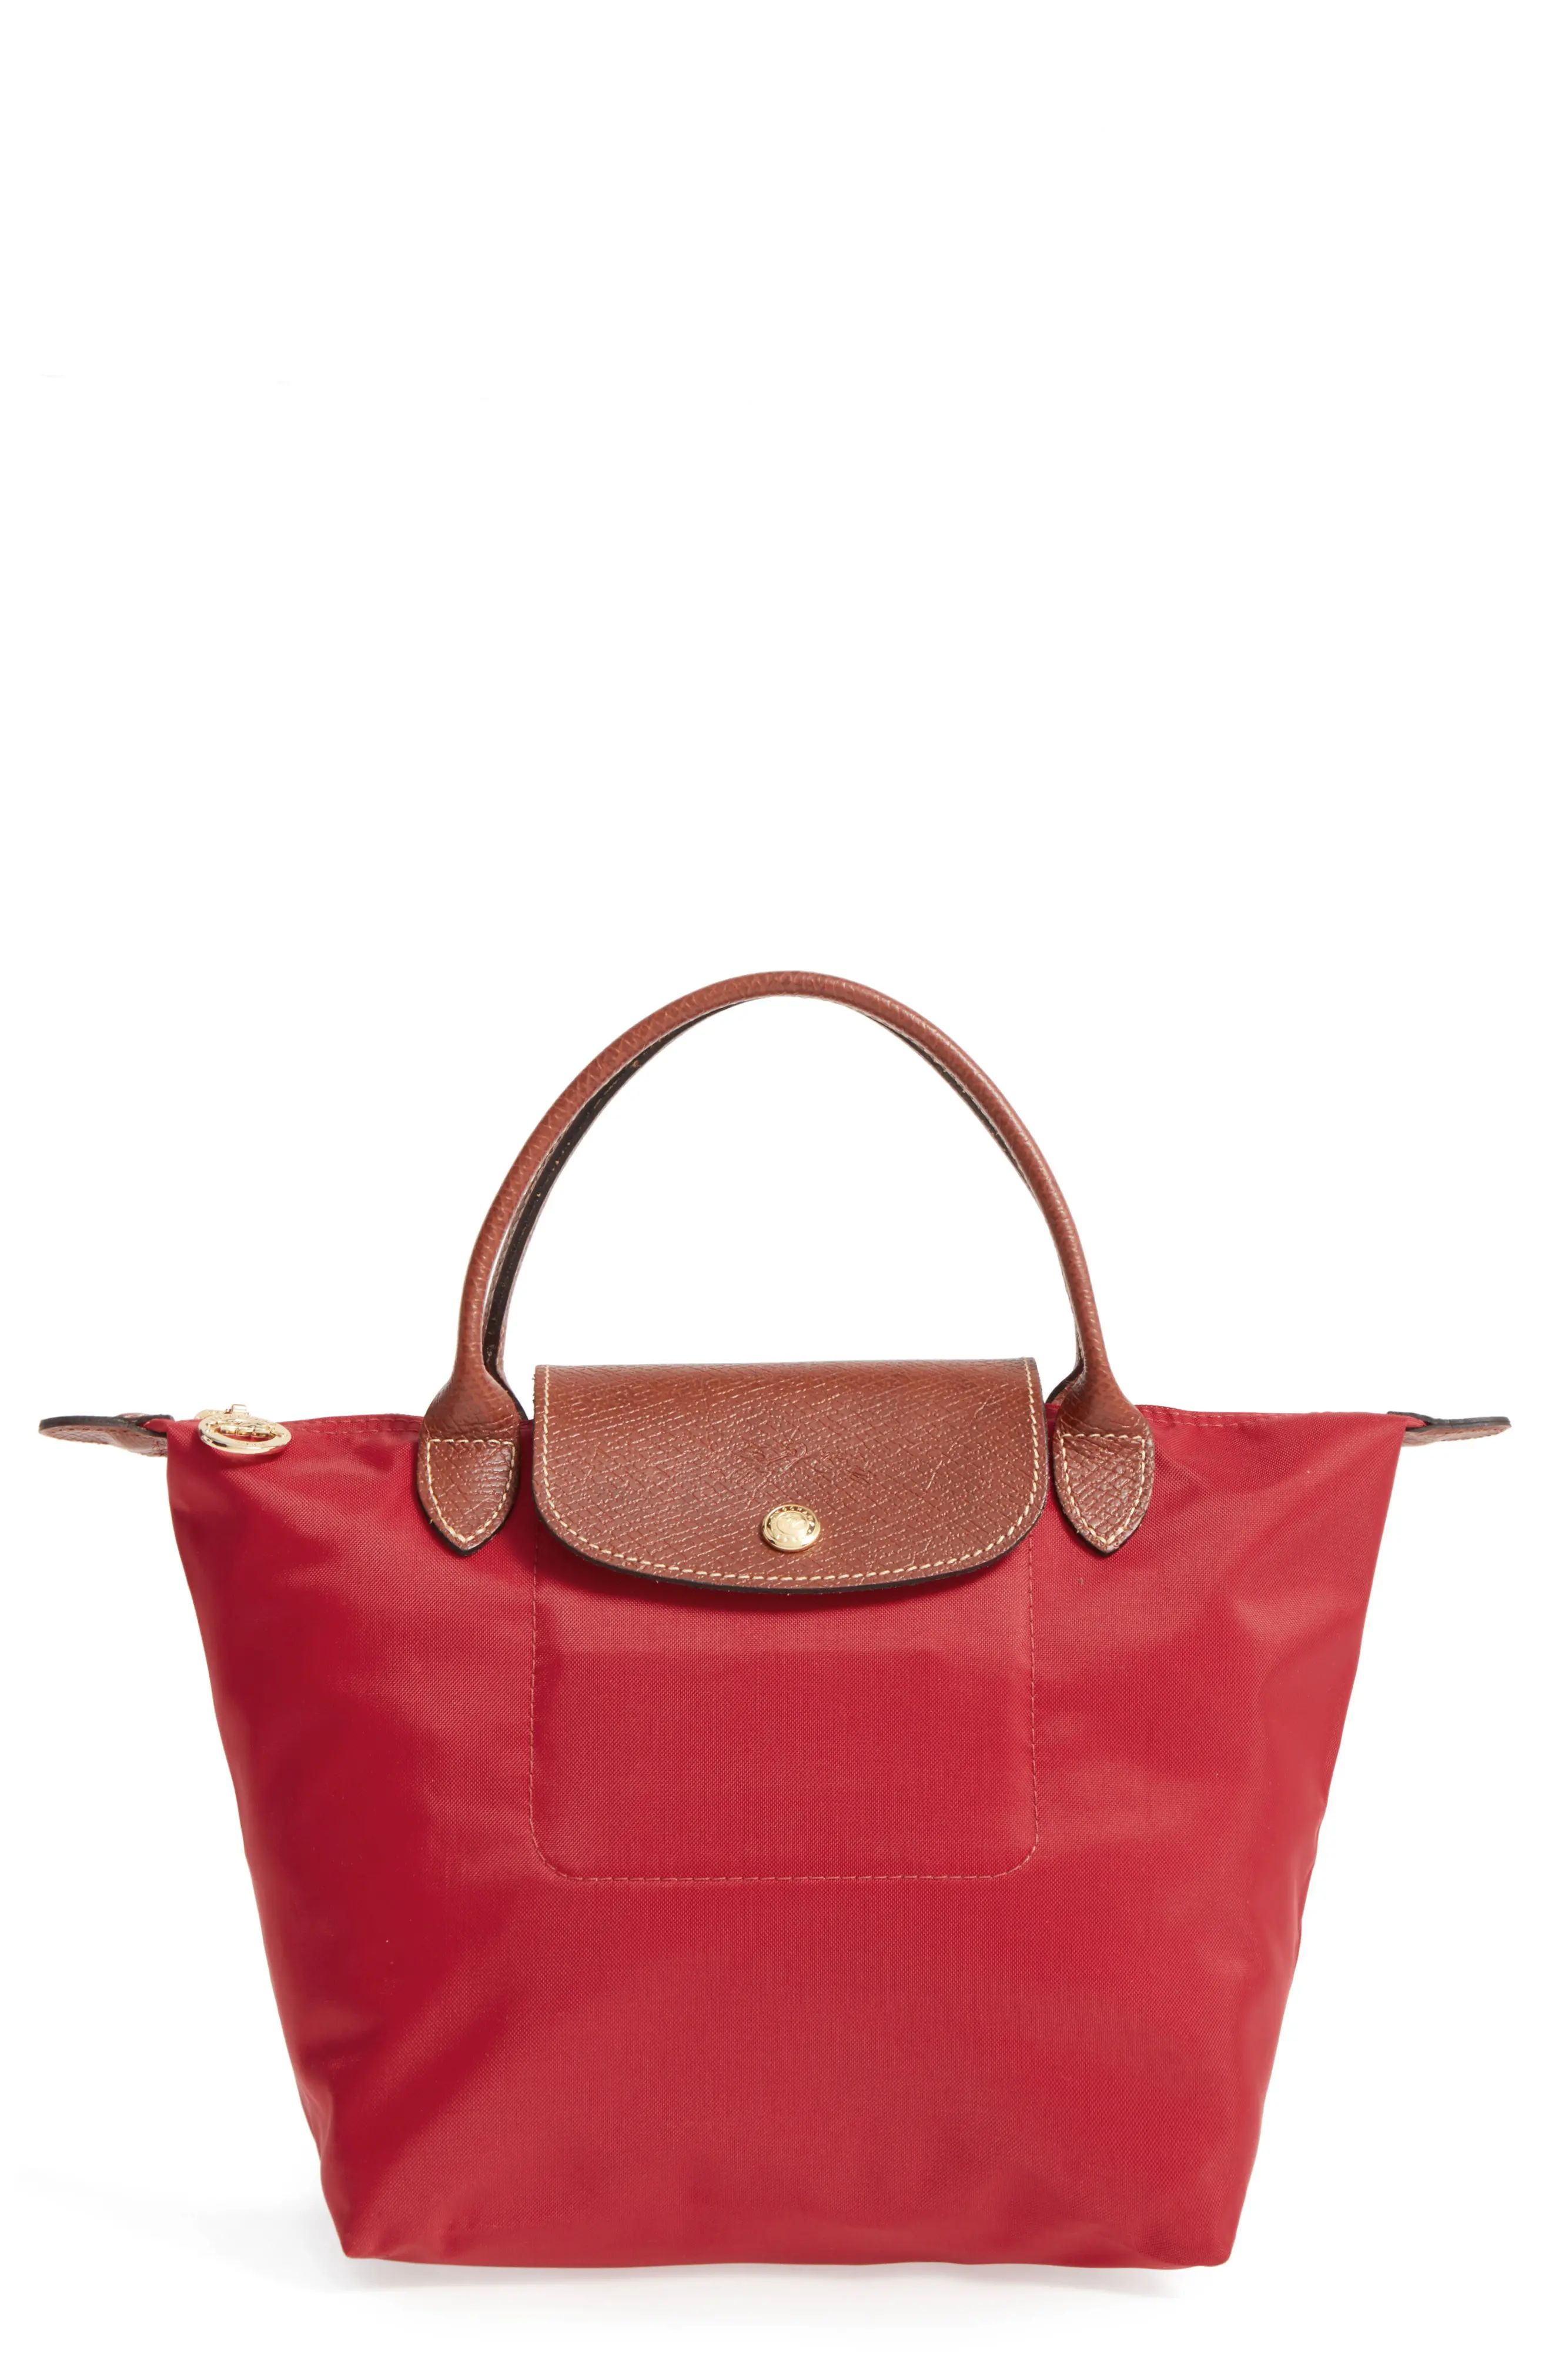 Longchamp 'Small Le Pliage' Top Handle Tote - Red | Nordstrom